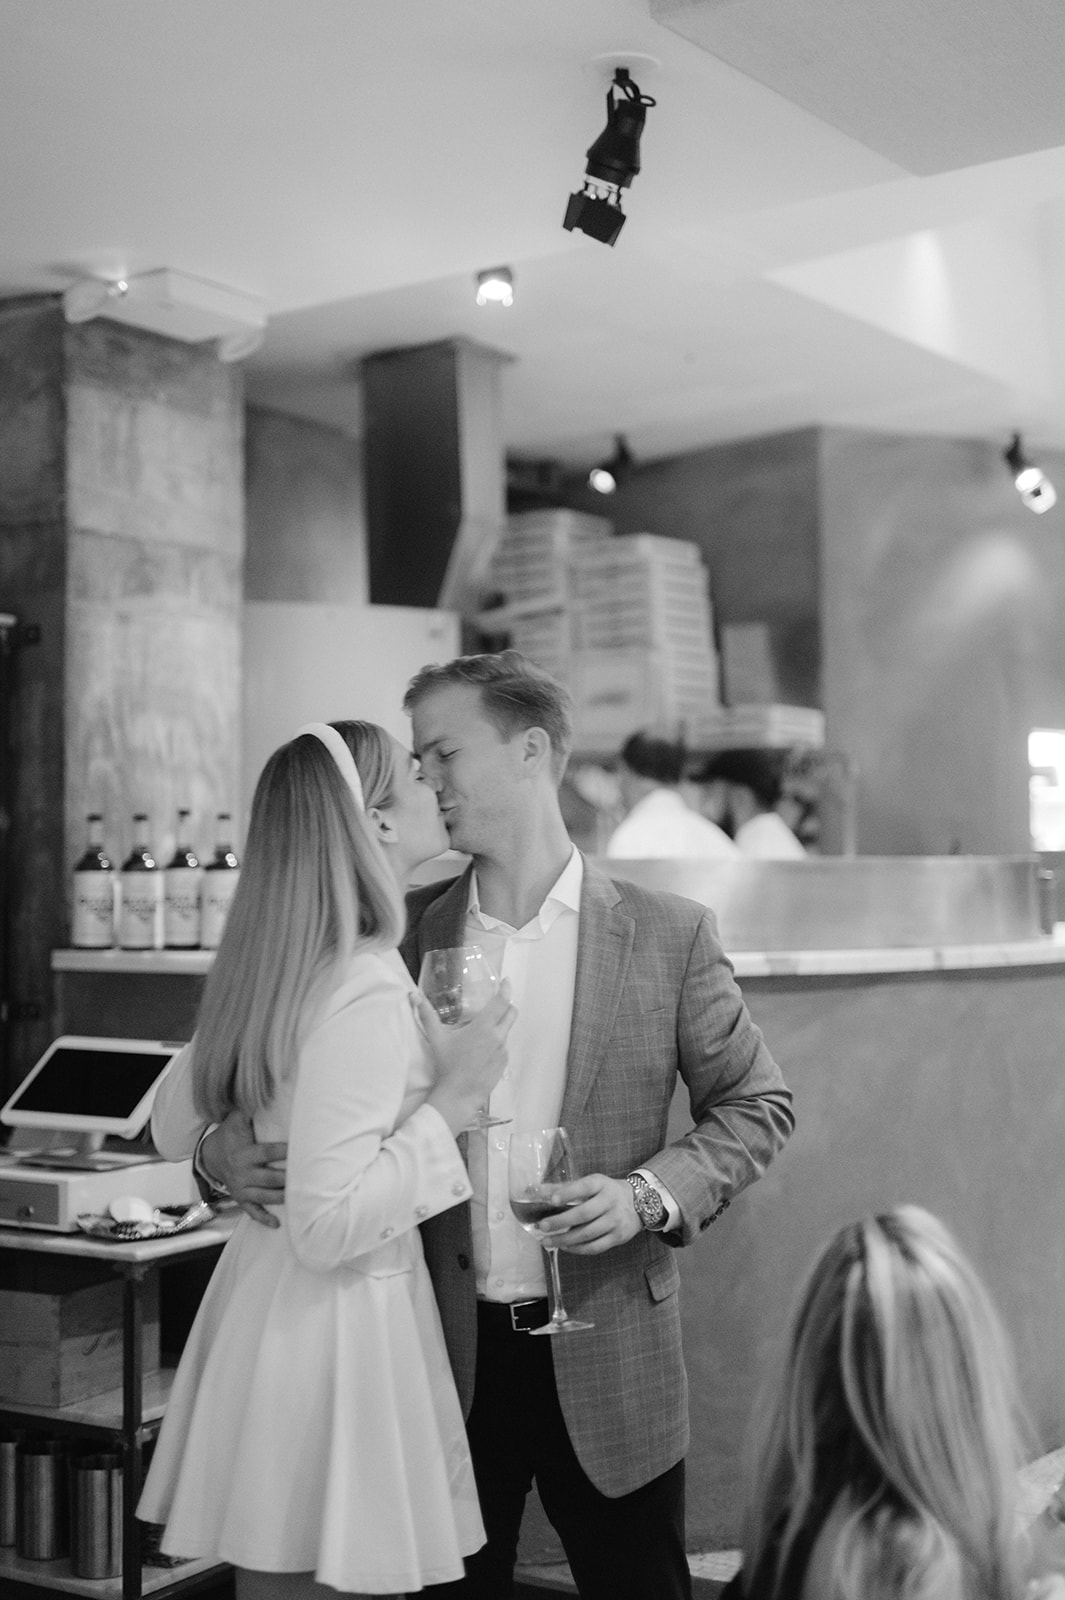 Bride and groom share a tender kiss, captured candidly at Coco Pazzaria NYC's wedding welcome party and rehearsal dinner.